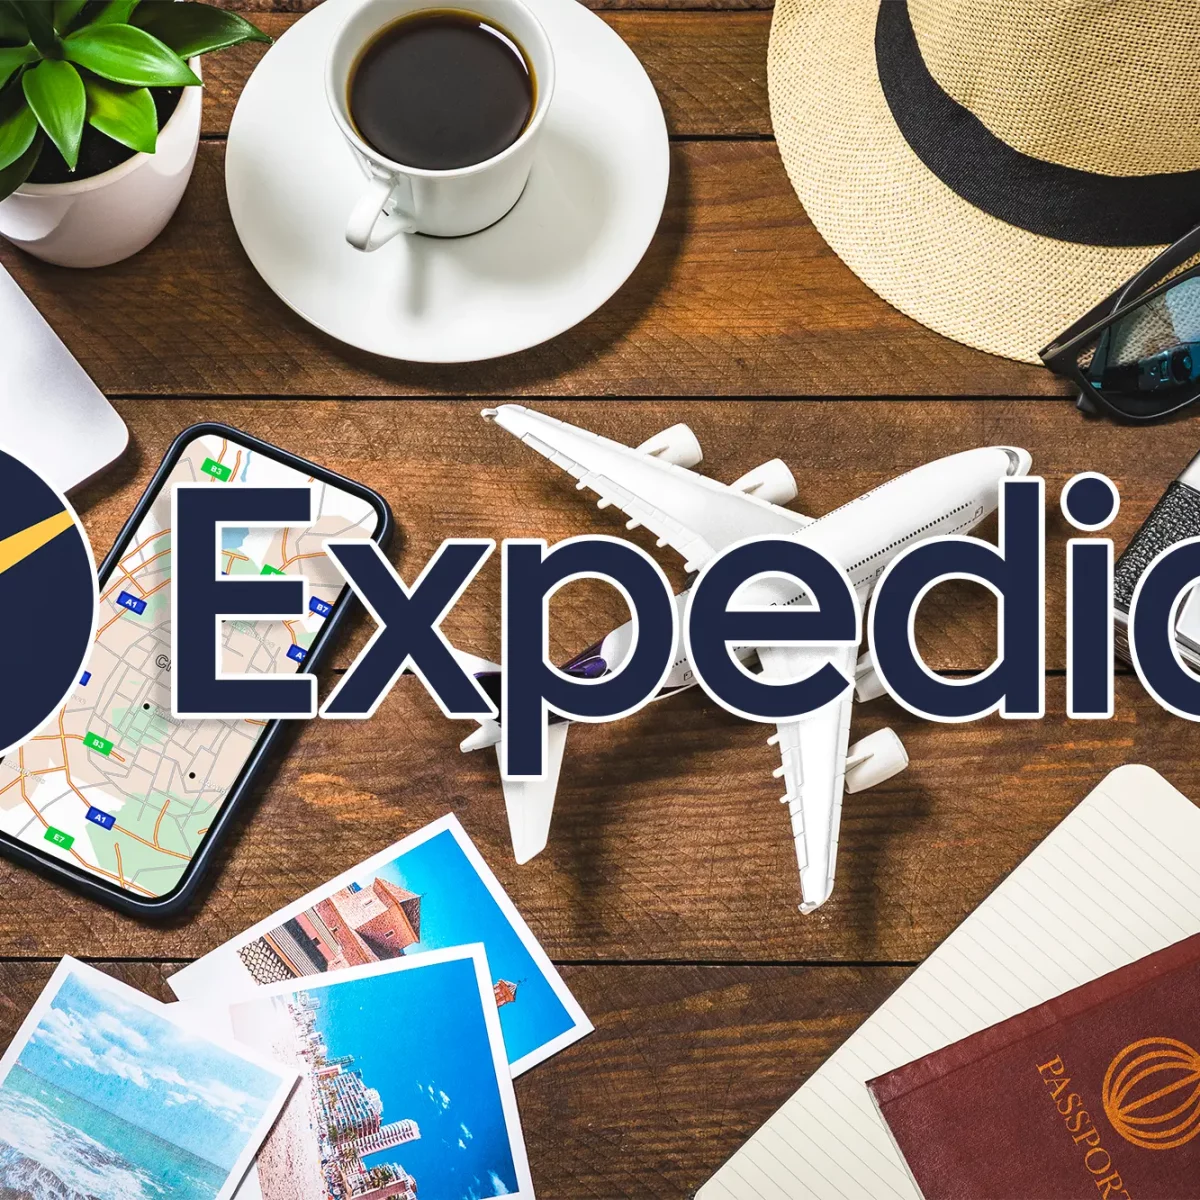 how to cancel reservation on expedia